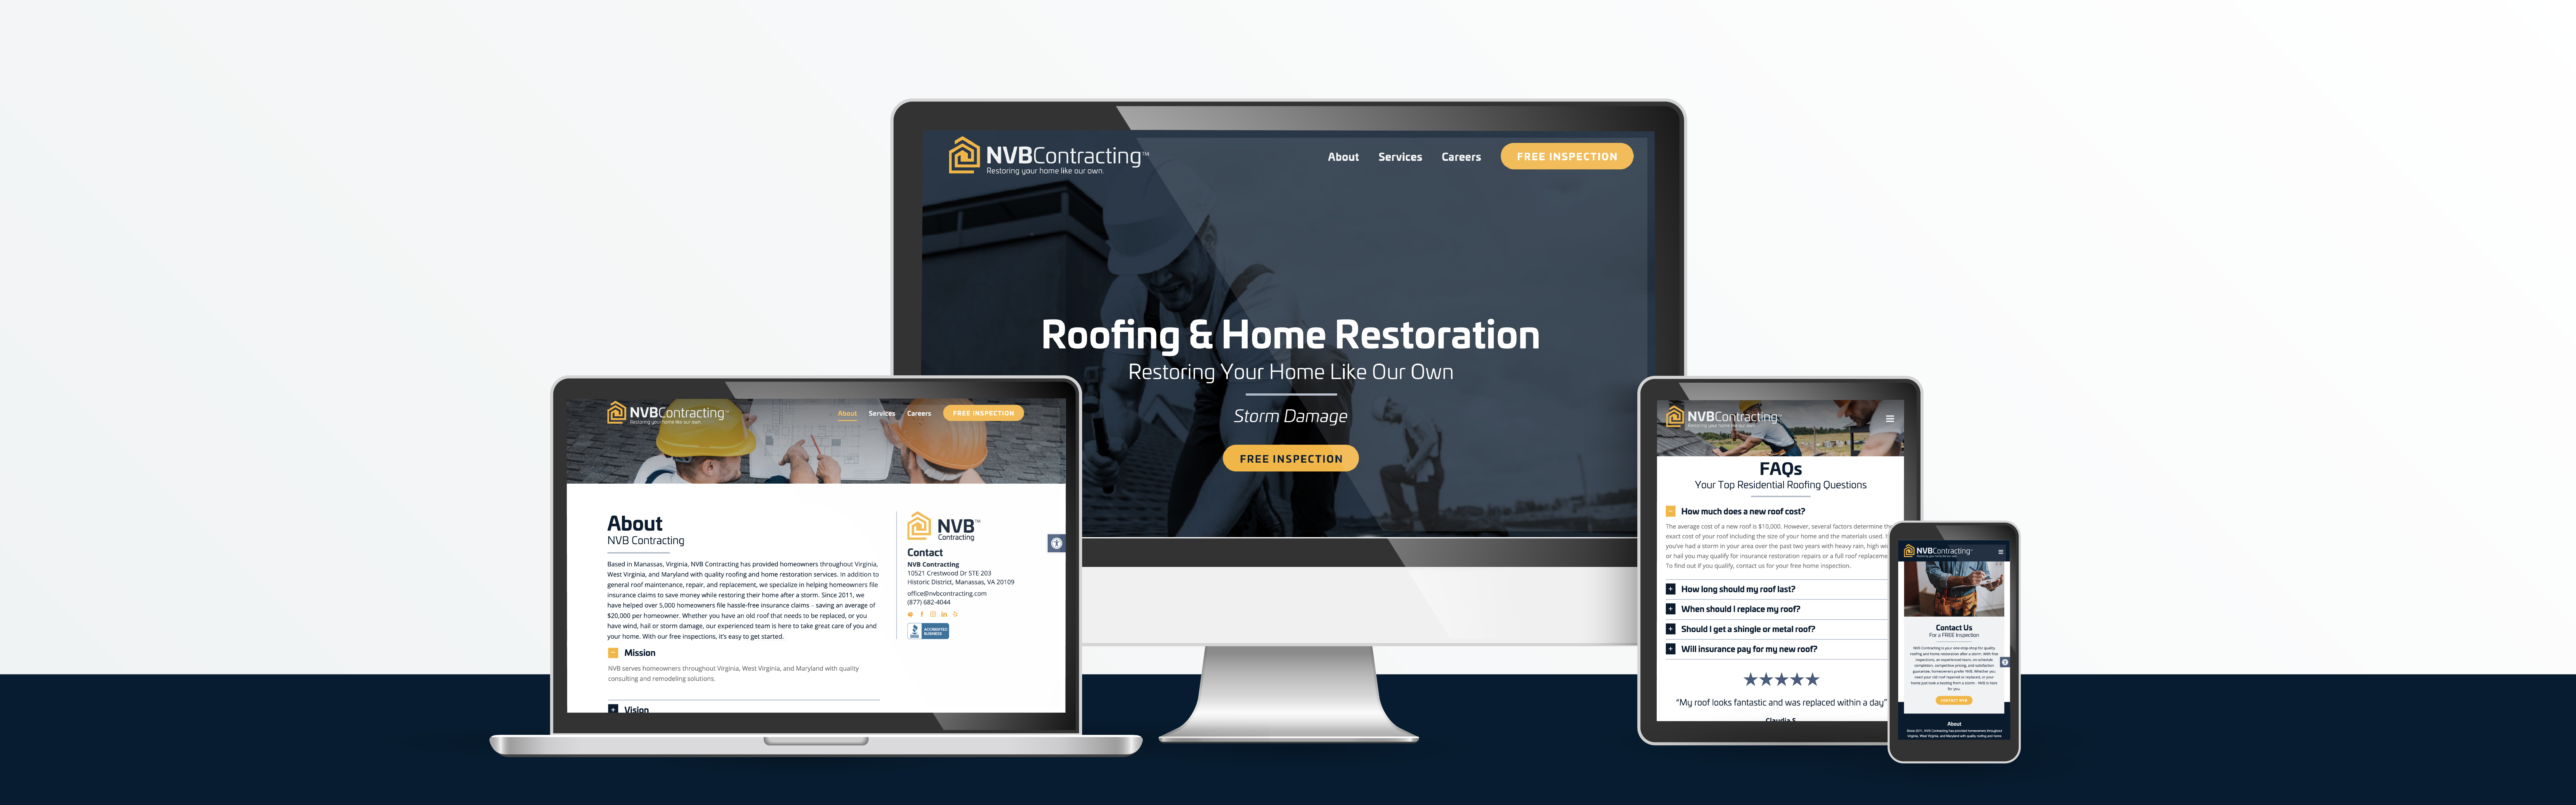 NVB Contracting website design